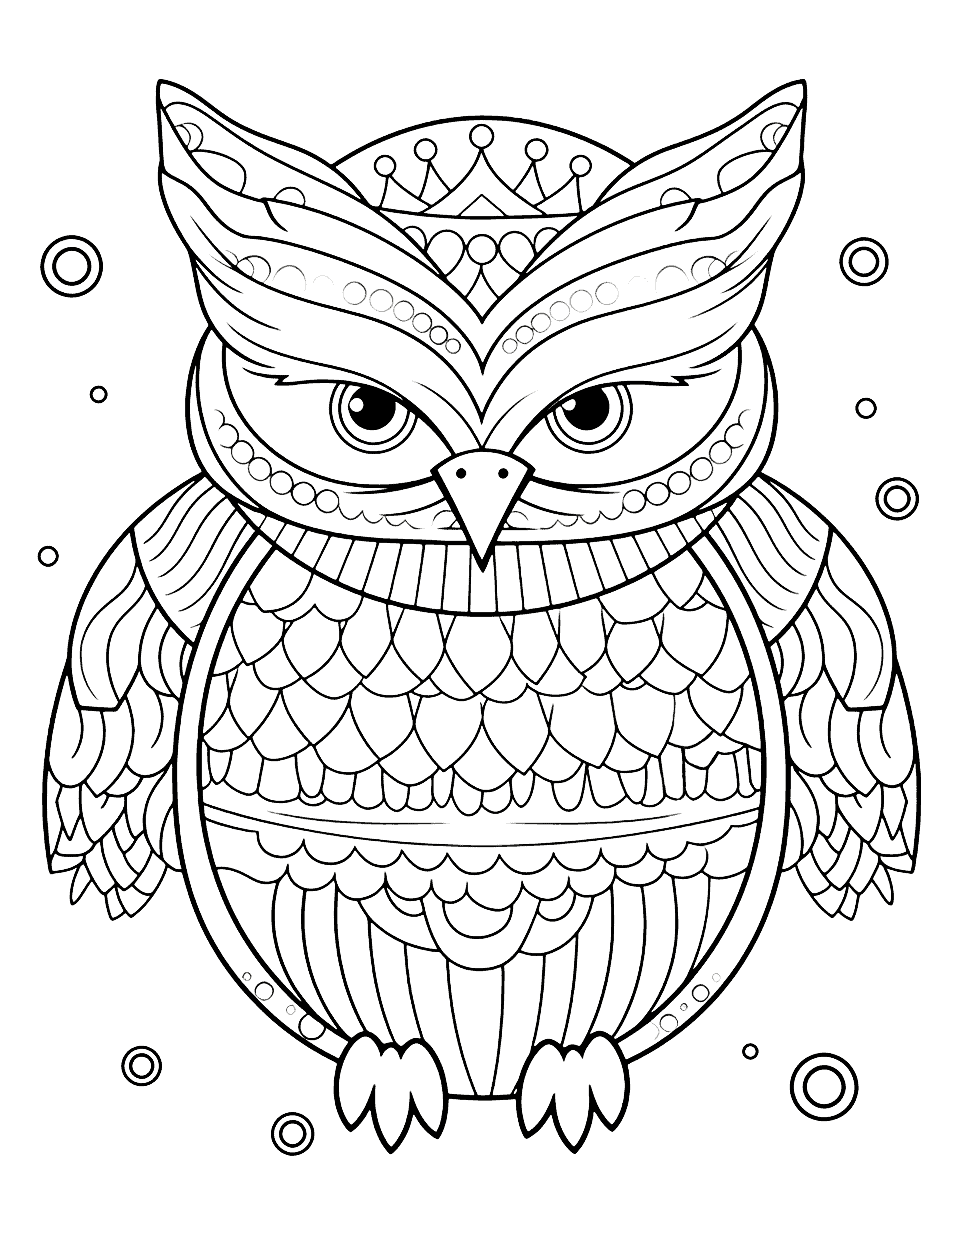 Zentangle Snowy Owl Winter Coloring Page - A complex, pattern-filled snowy owl for a relaxing coloring session.